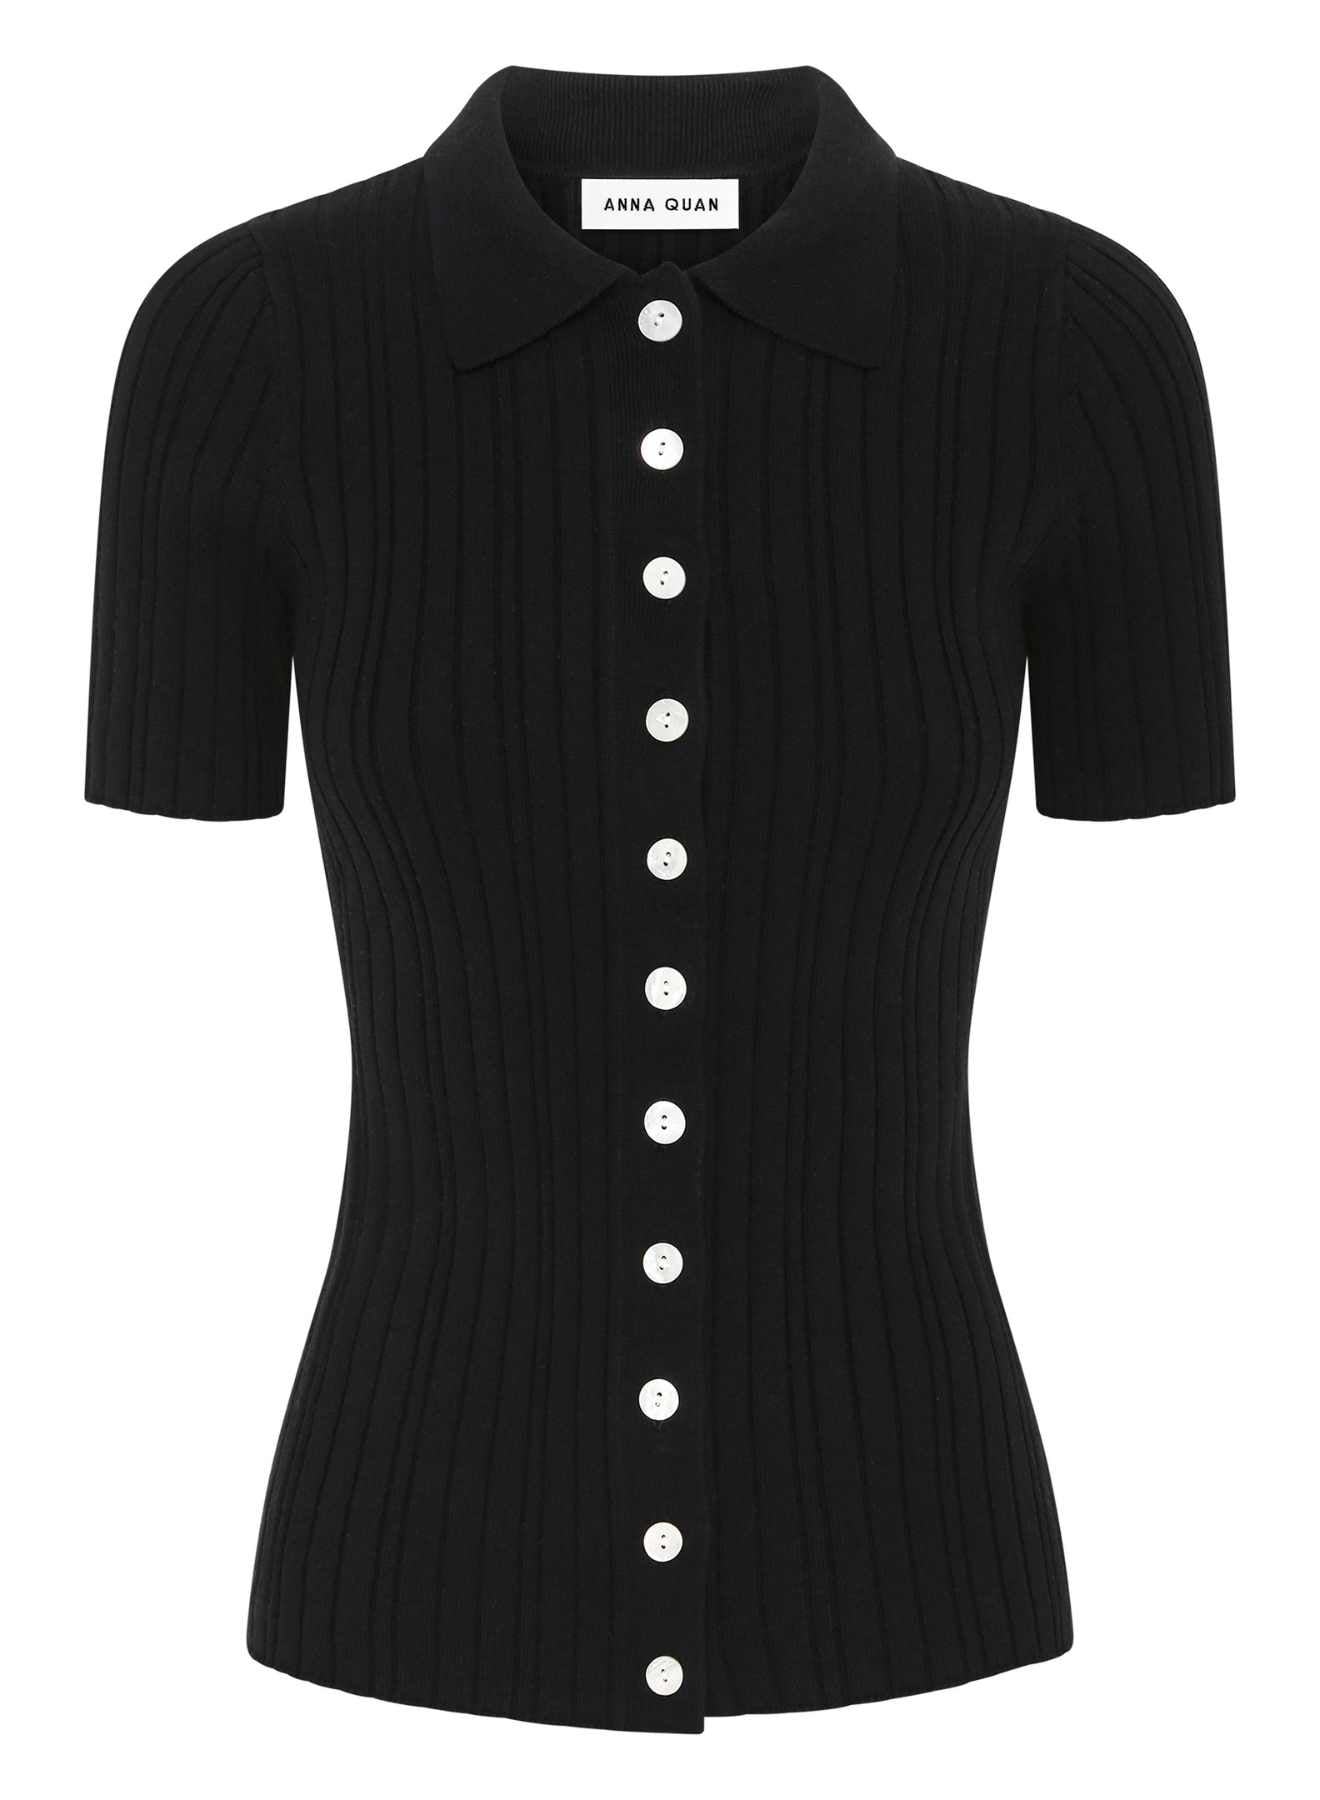 Rib knit short sleeve polo top top with contrast button up. Black knit top, black short sleeve knit top, casual everyday top, casual top, casual knit top.